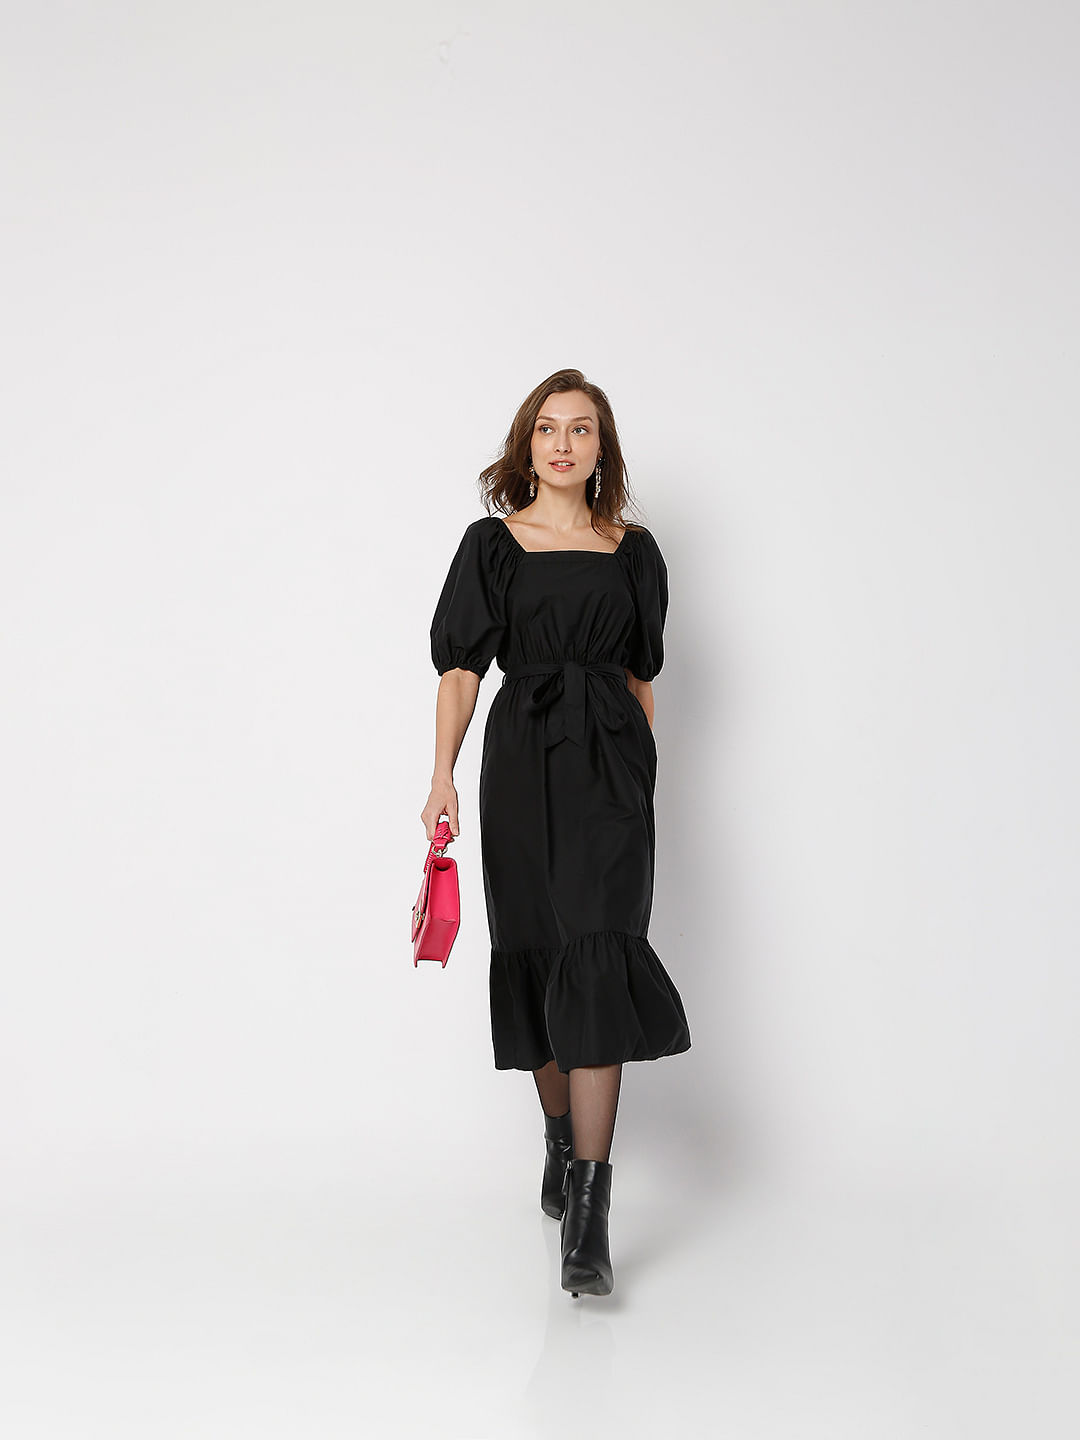 VERO MODA - Be party-chic in our stunning Isabella wrap dress! | Facebook